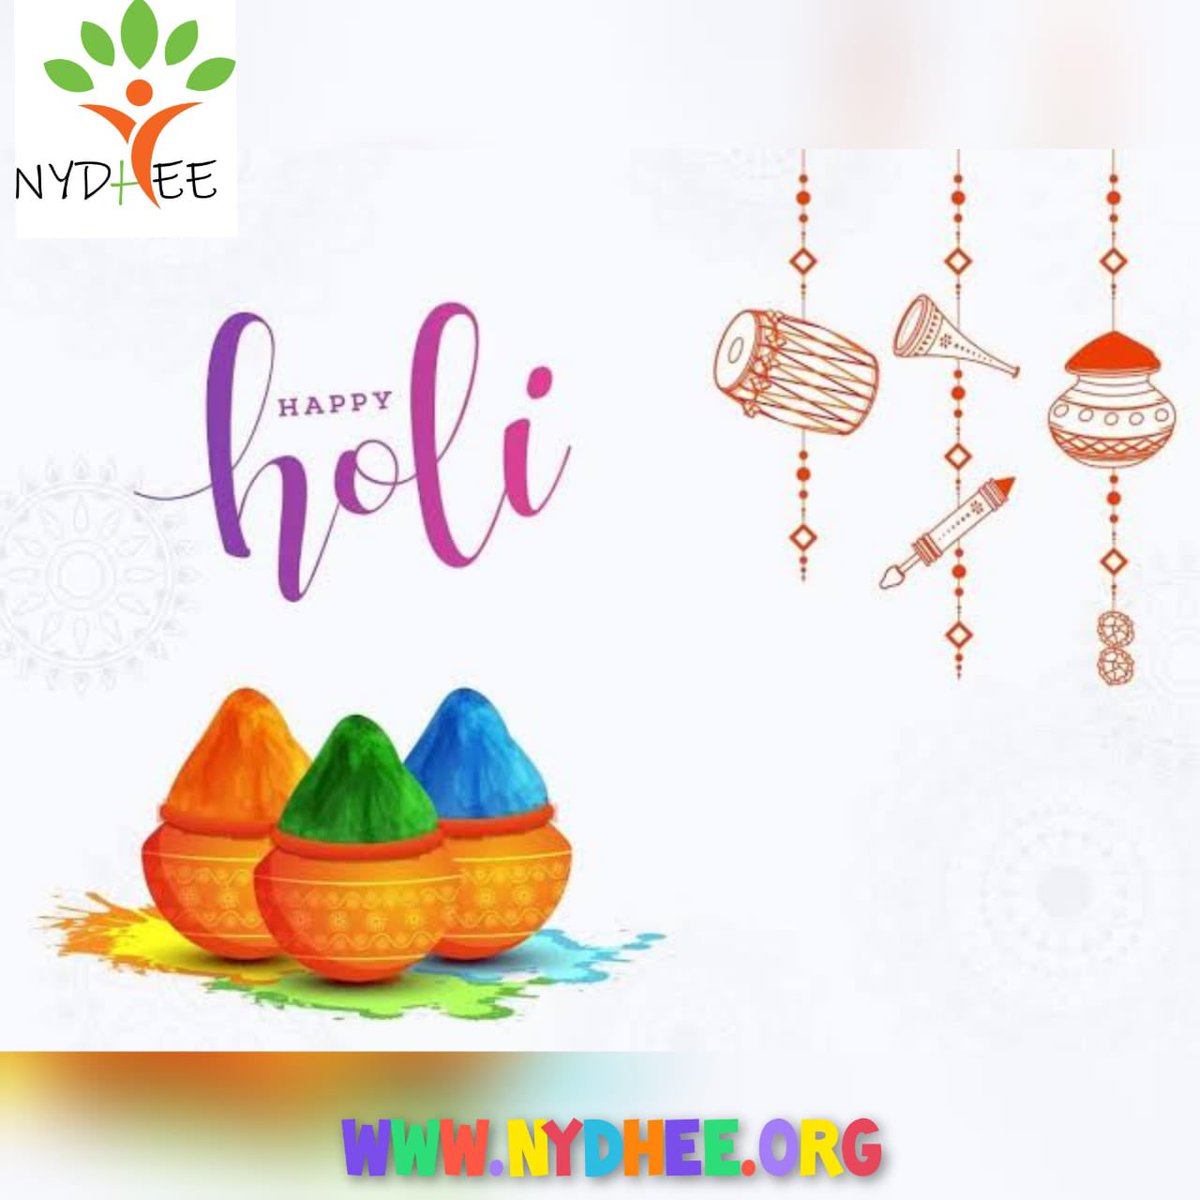 This Holi, NYDHEE wishes everyone a canvas of colorful possibilities. May this festival paint our lives with the colors of joy, harmony, and innovation. Happy Holi! #NYDHEEHoli #FestivalOfColors #InclusiveGrowth